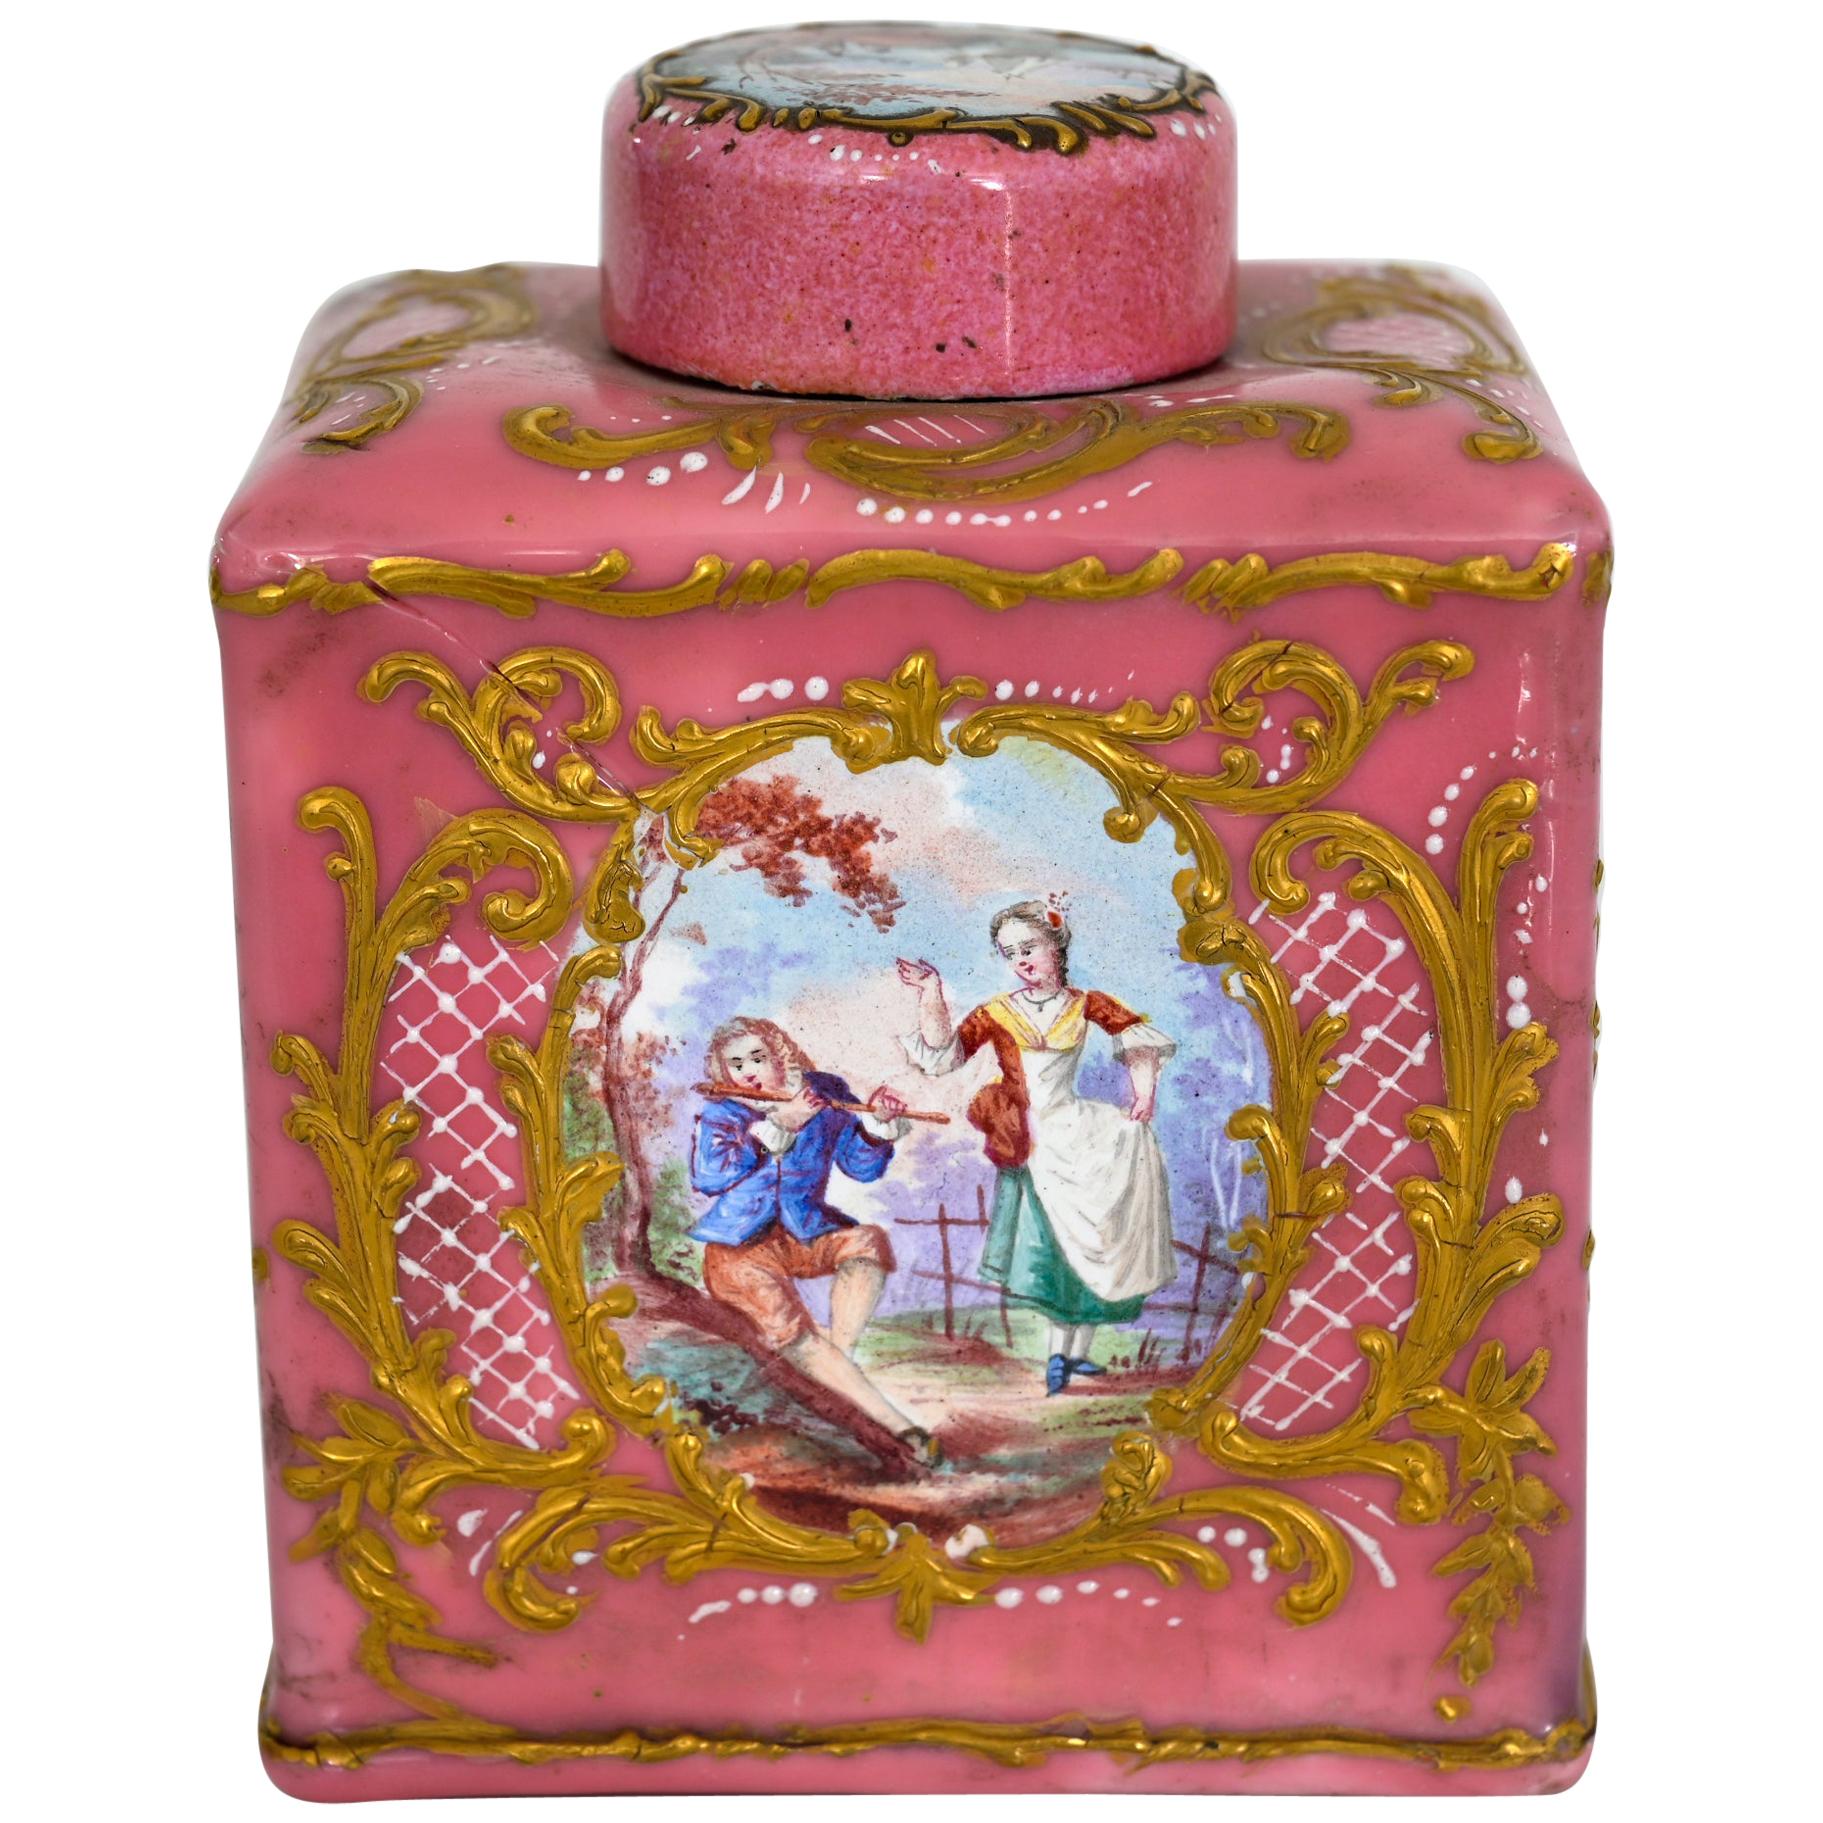 Enamel Tea Caddy Vienna 18th Century with Landscape For Sale